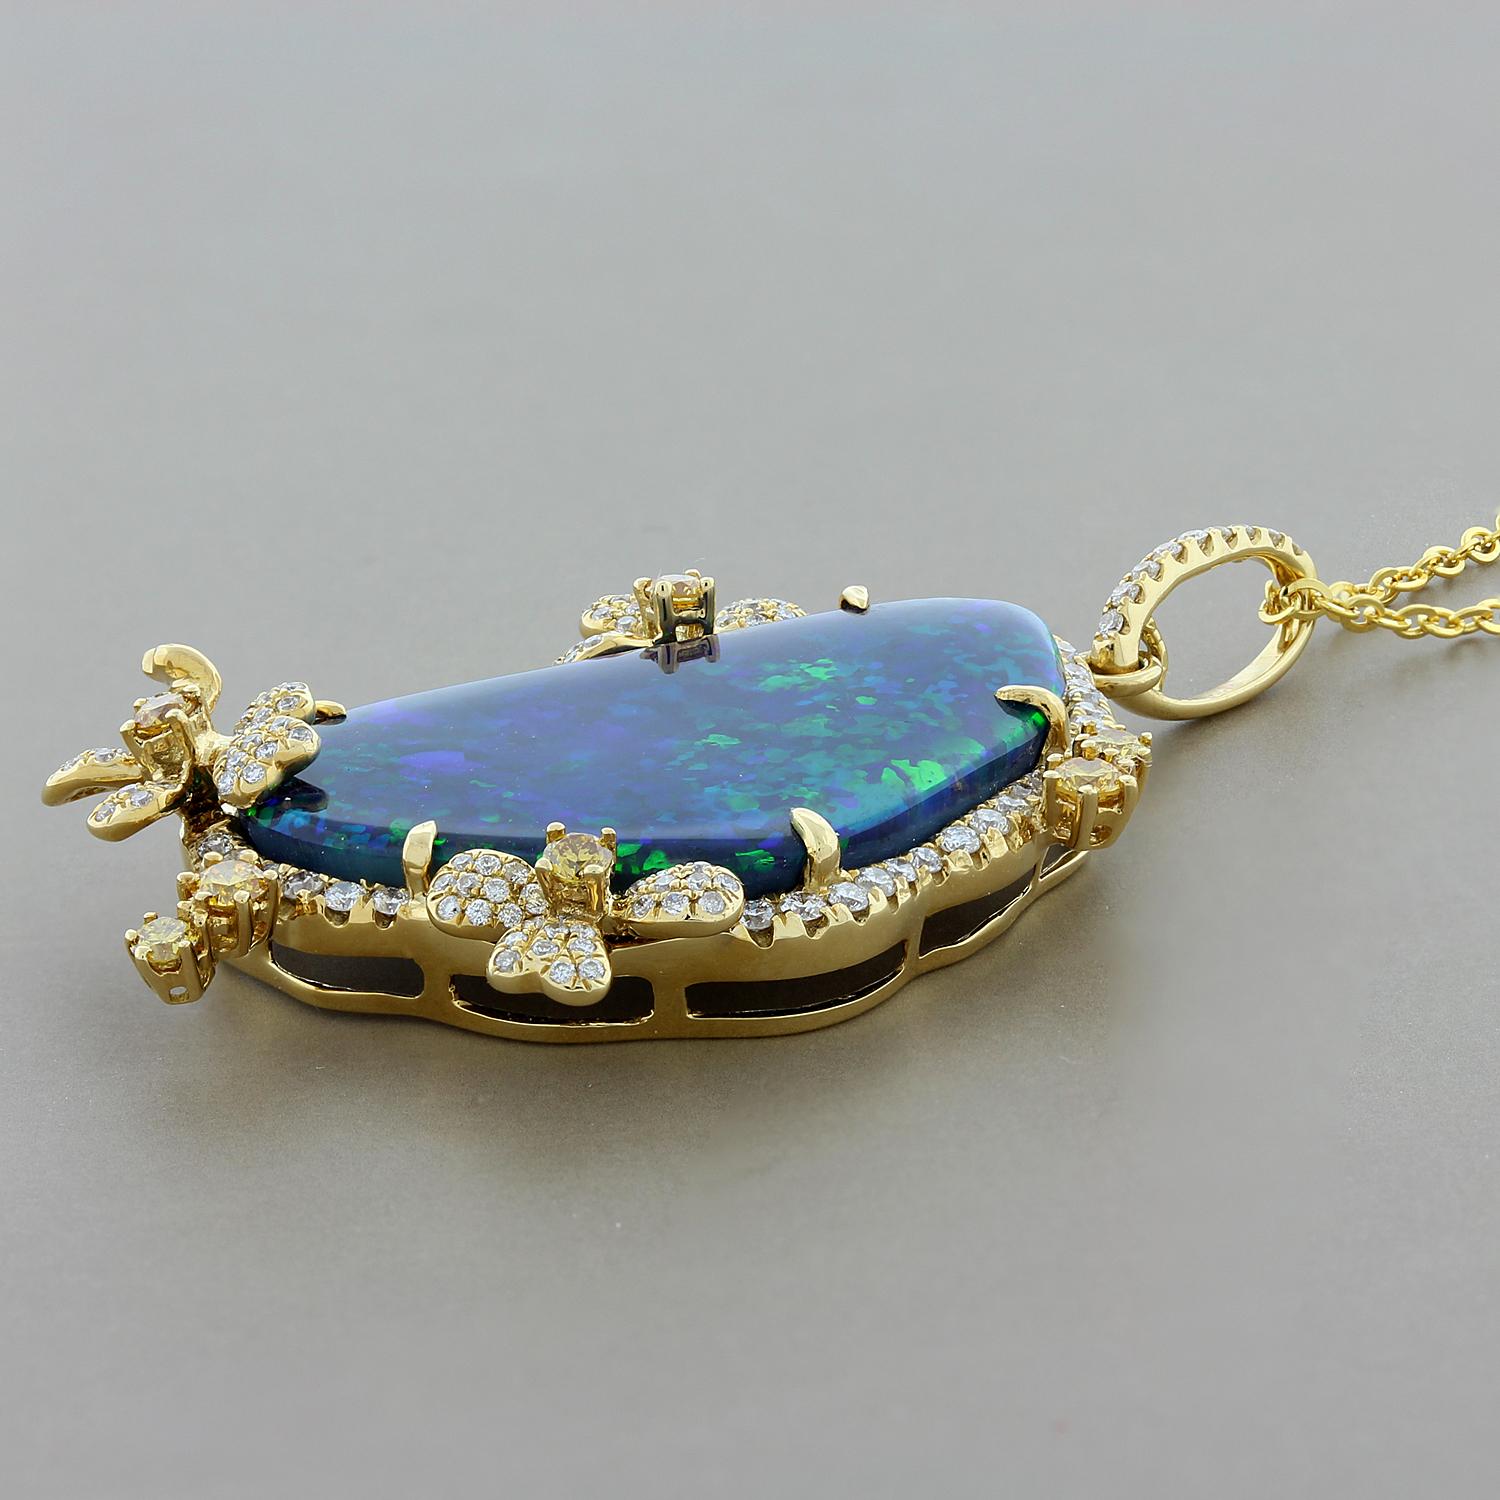 This grand pendant features a rare Australian black opal weighing 15.32 carats with strong play of color and flashes of blue and green. There are 1.14 carats of fancy yellow and white diamonds surrounding the black opal set in 18K yellow gold floral